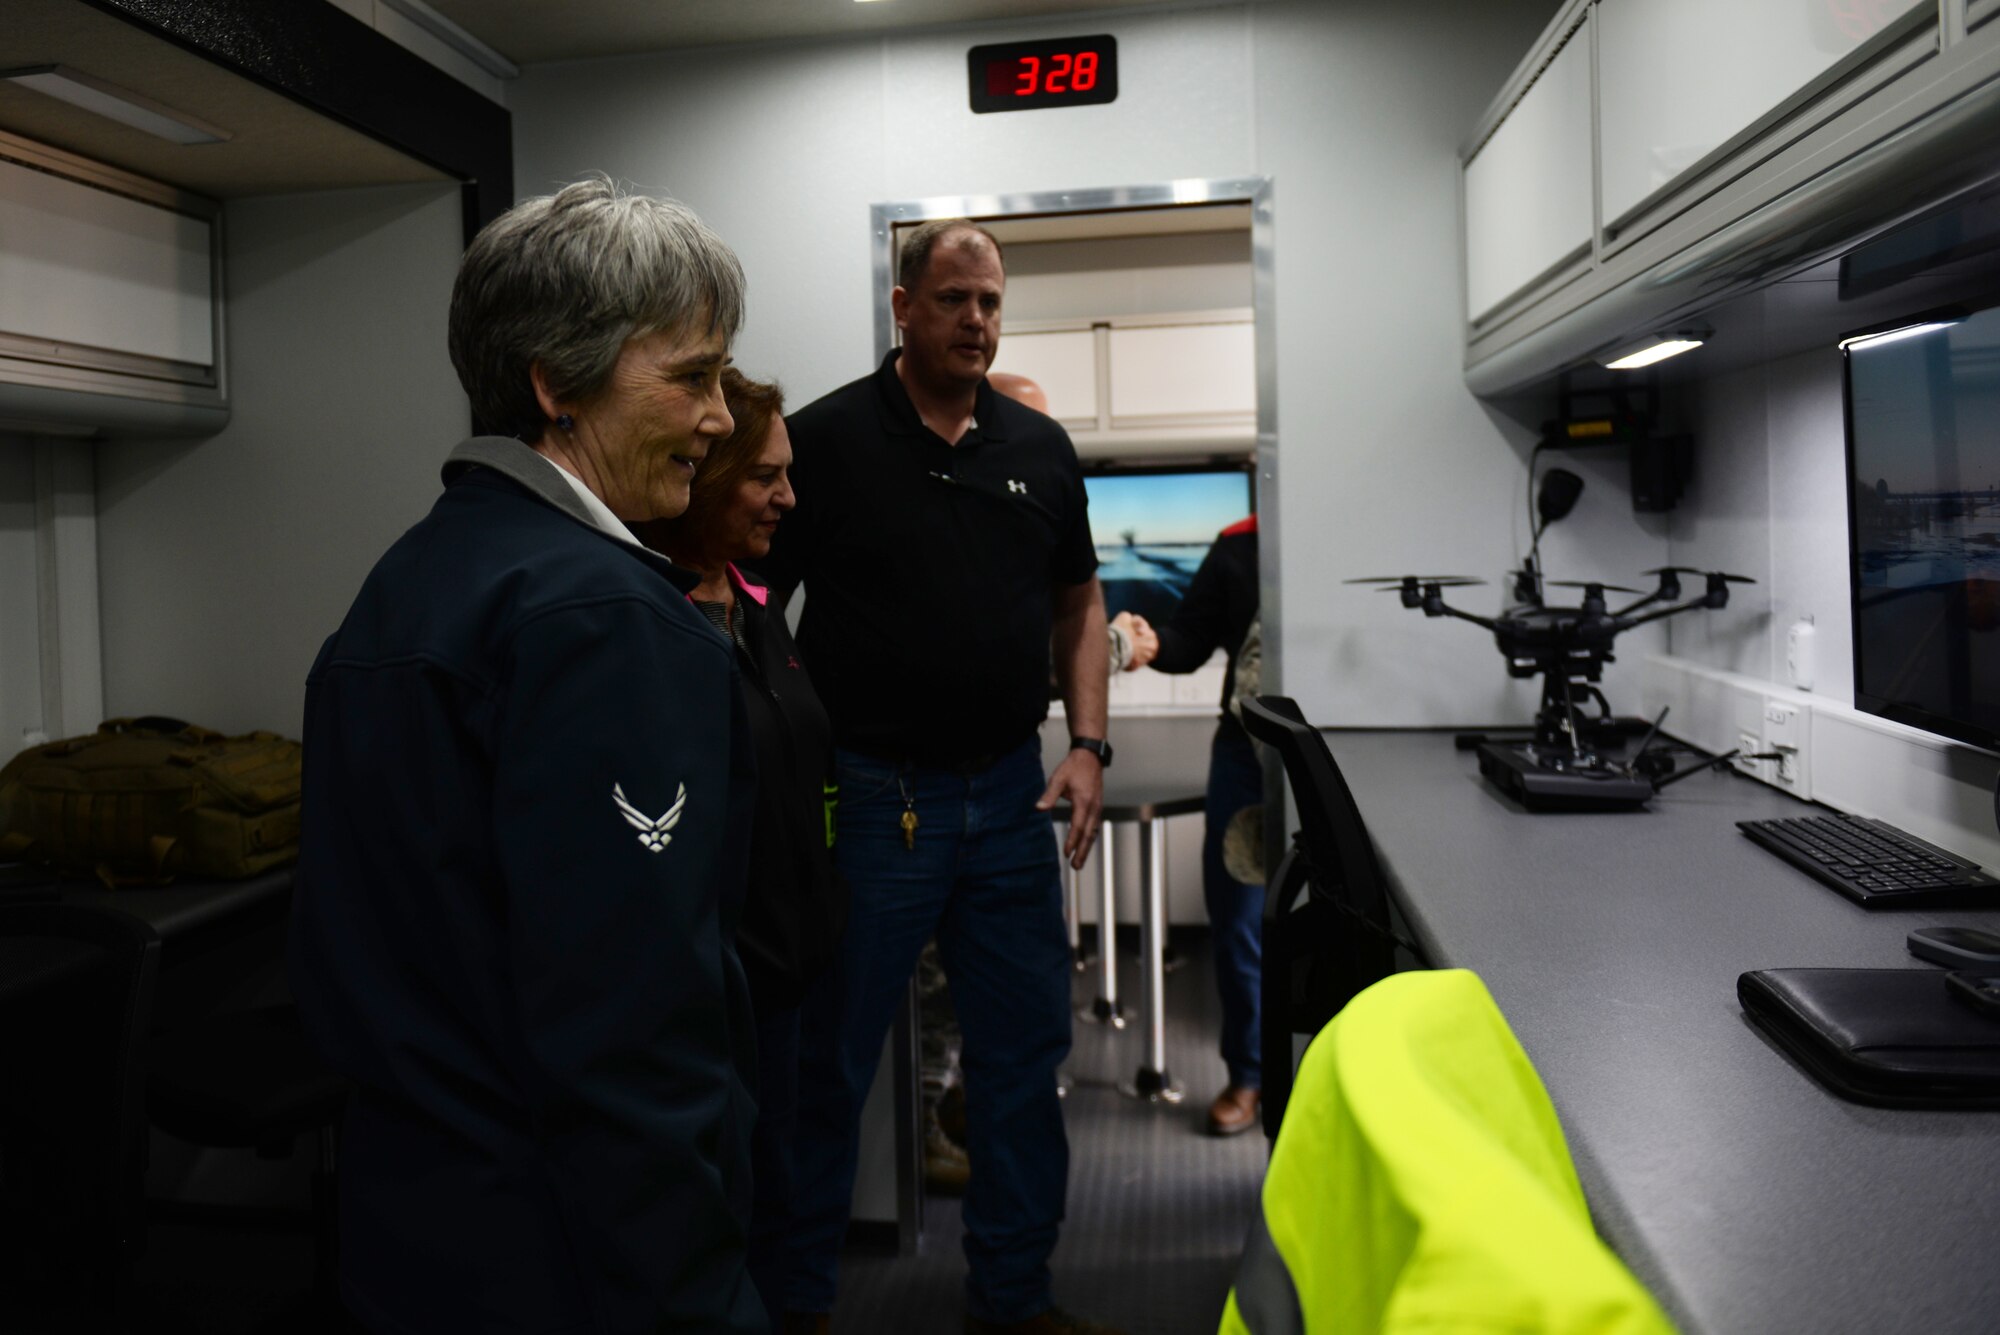 Secretary of the Air Force Heather Wilson tours the 55th Wing’s mobile Emergency Operations Center March 22, 2019, at Offutt Air Force Base, Nebraska. A week earlier the base began taking on flood waters that eventually covered one-third of the installation. (U.S. Air Force photo by Tech. Sgt. Rachelle Blake)